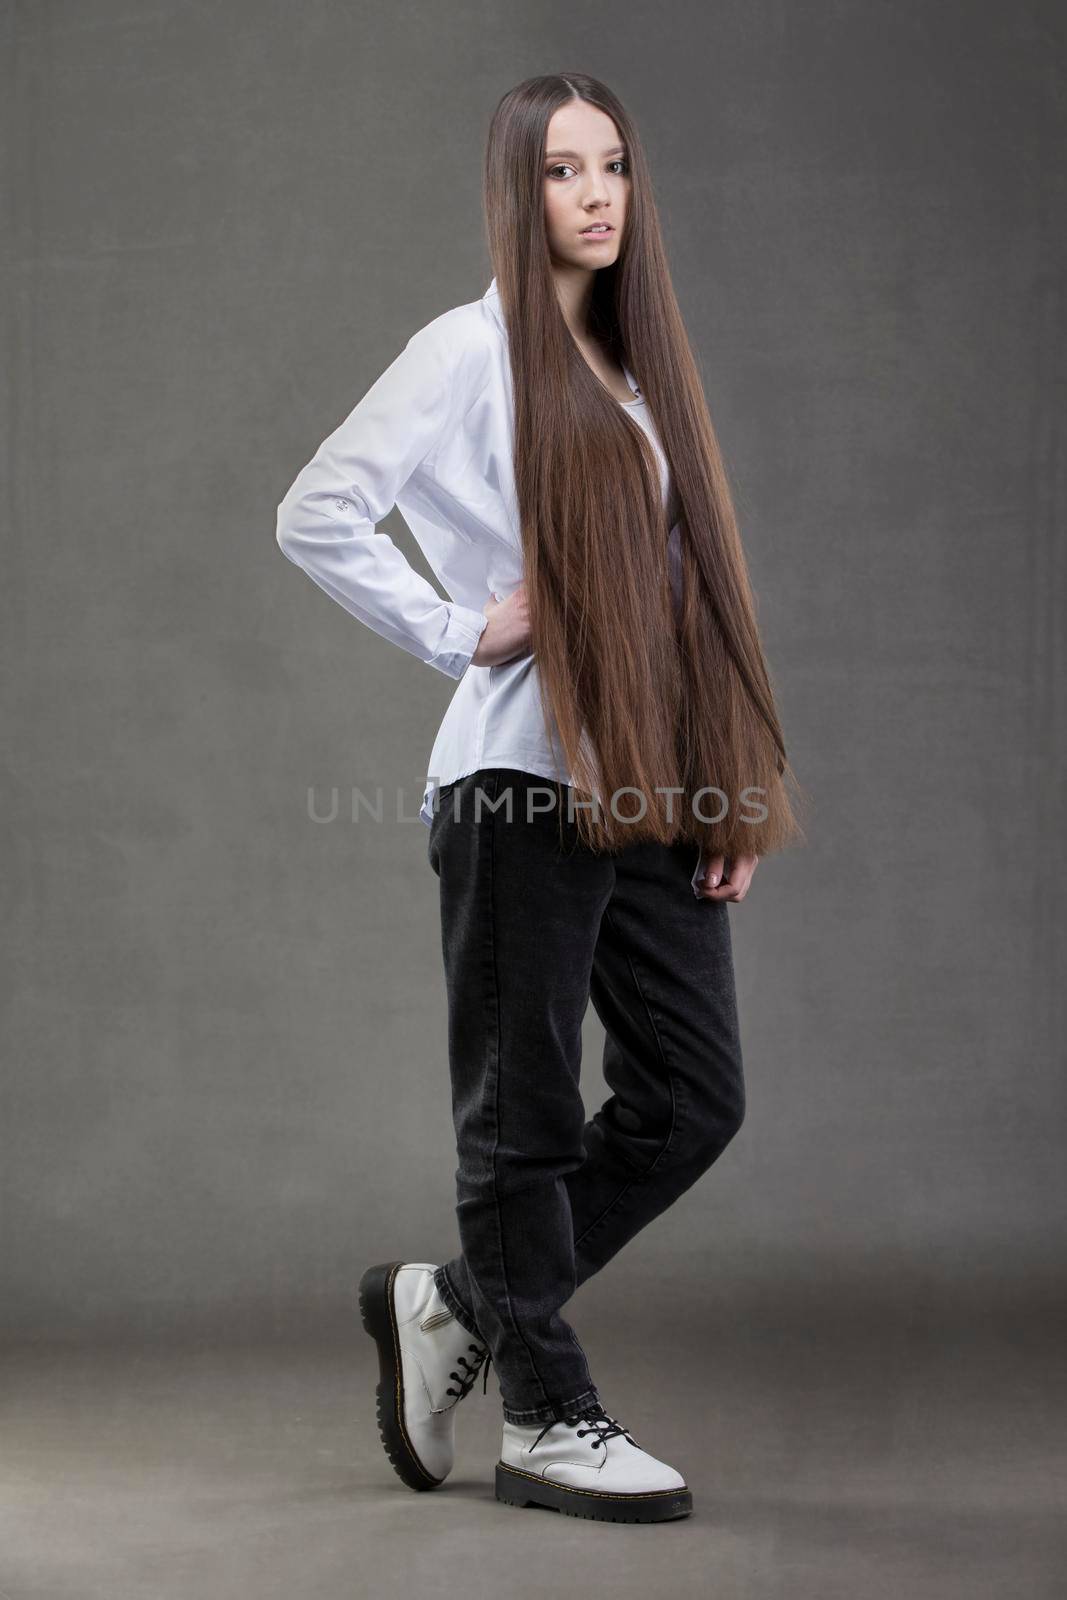 A beautiful young girl in height with long dark hair.